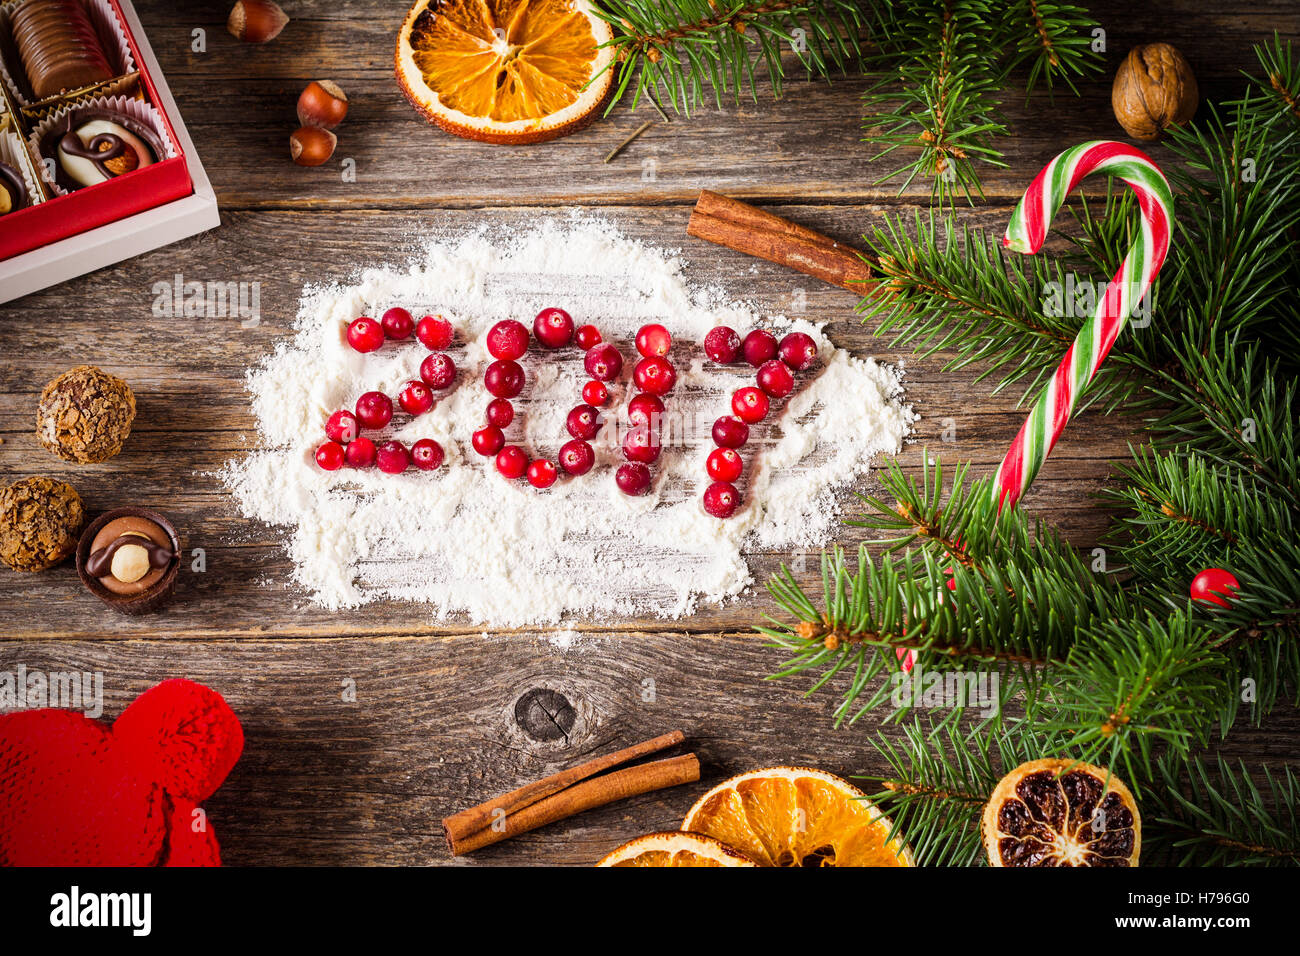 Happy New Year 2017 card ! Various candies, dried fruits, spices, fir tree and cranberries on wooden background with 2017 Stock Photo